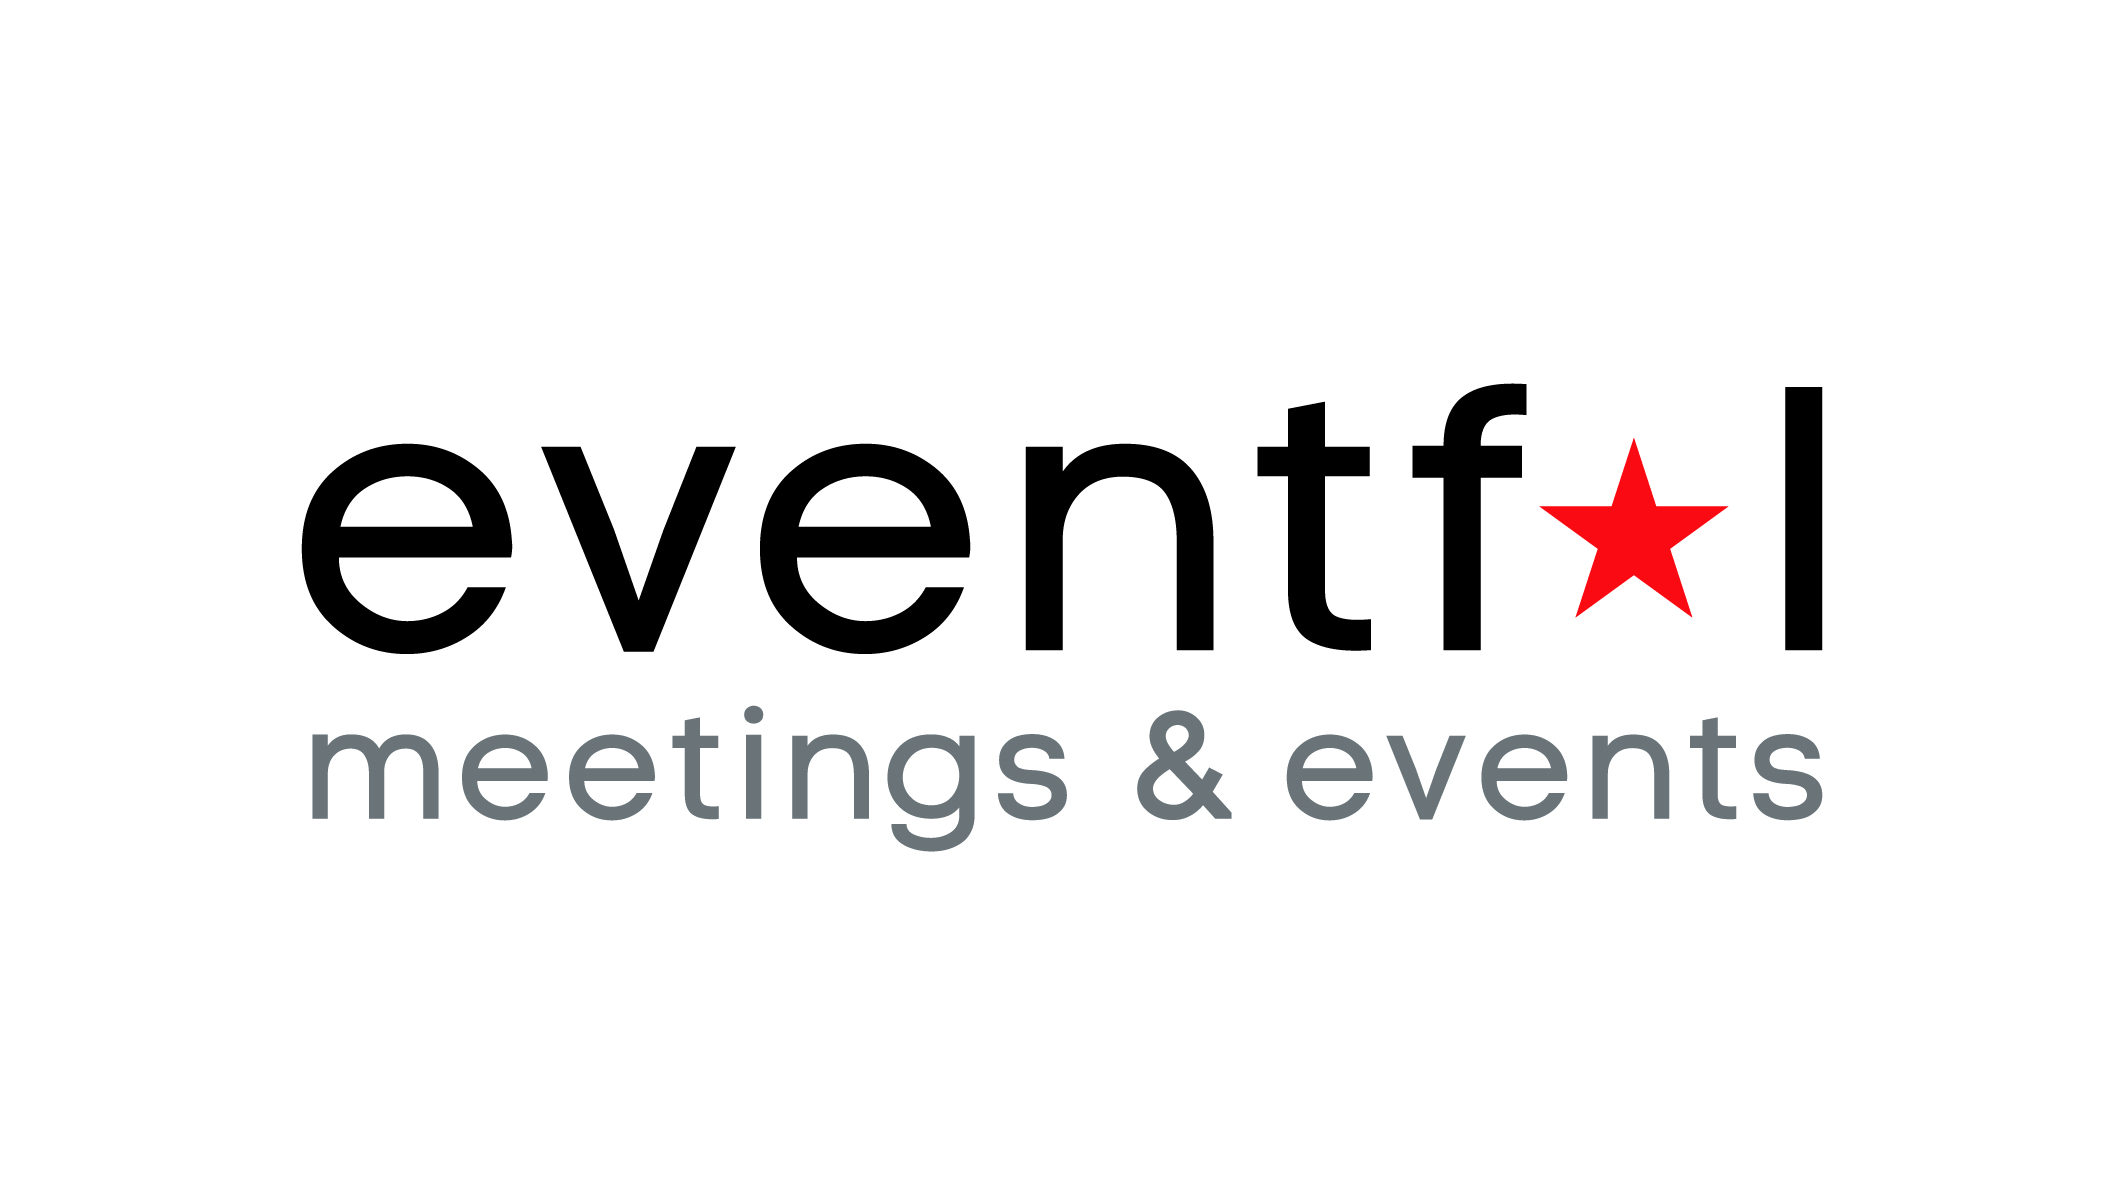 eventful meetings and events – NEAS